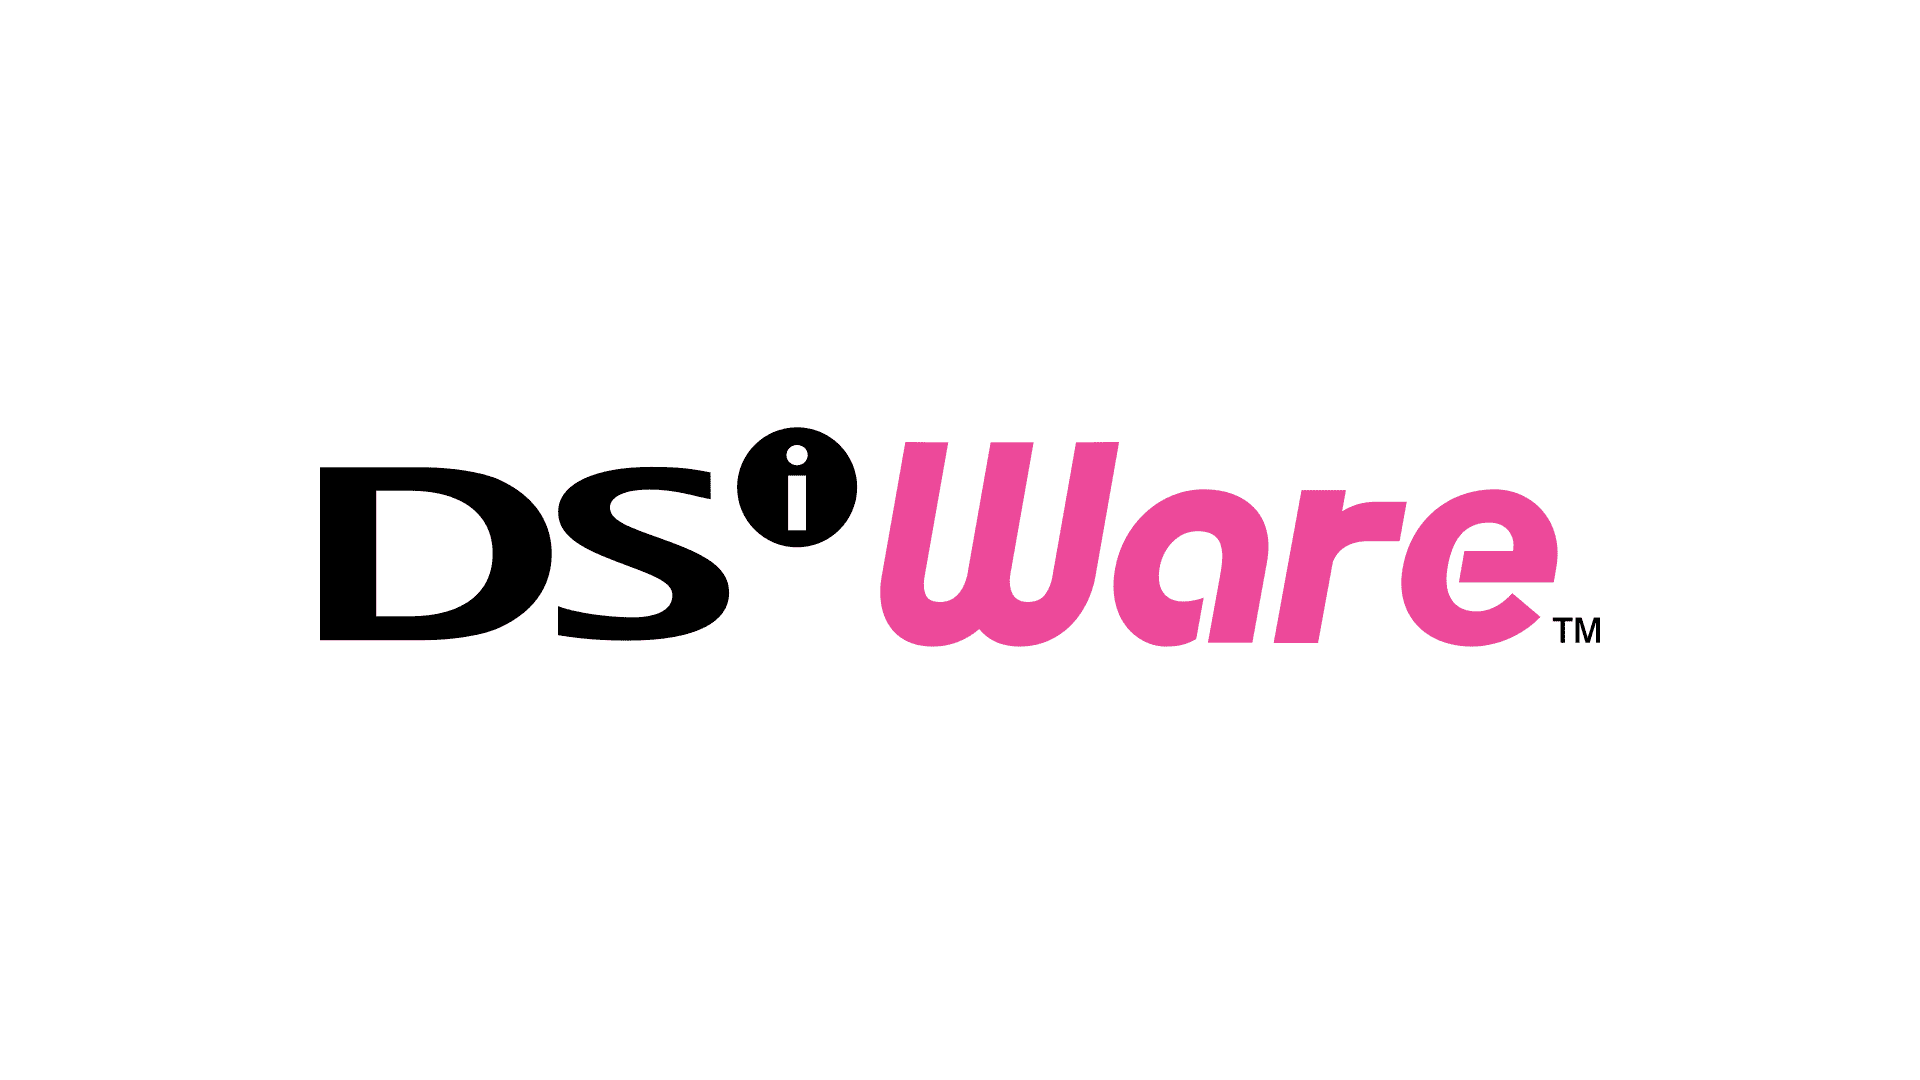 Nintendo Delists Over 250 DSiware Games From The eShop